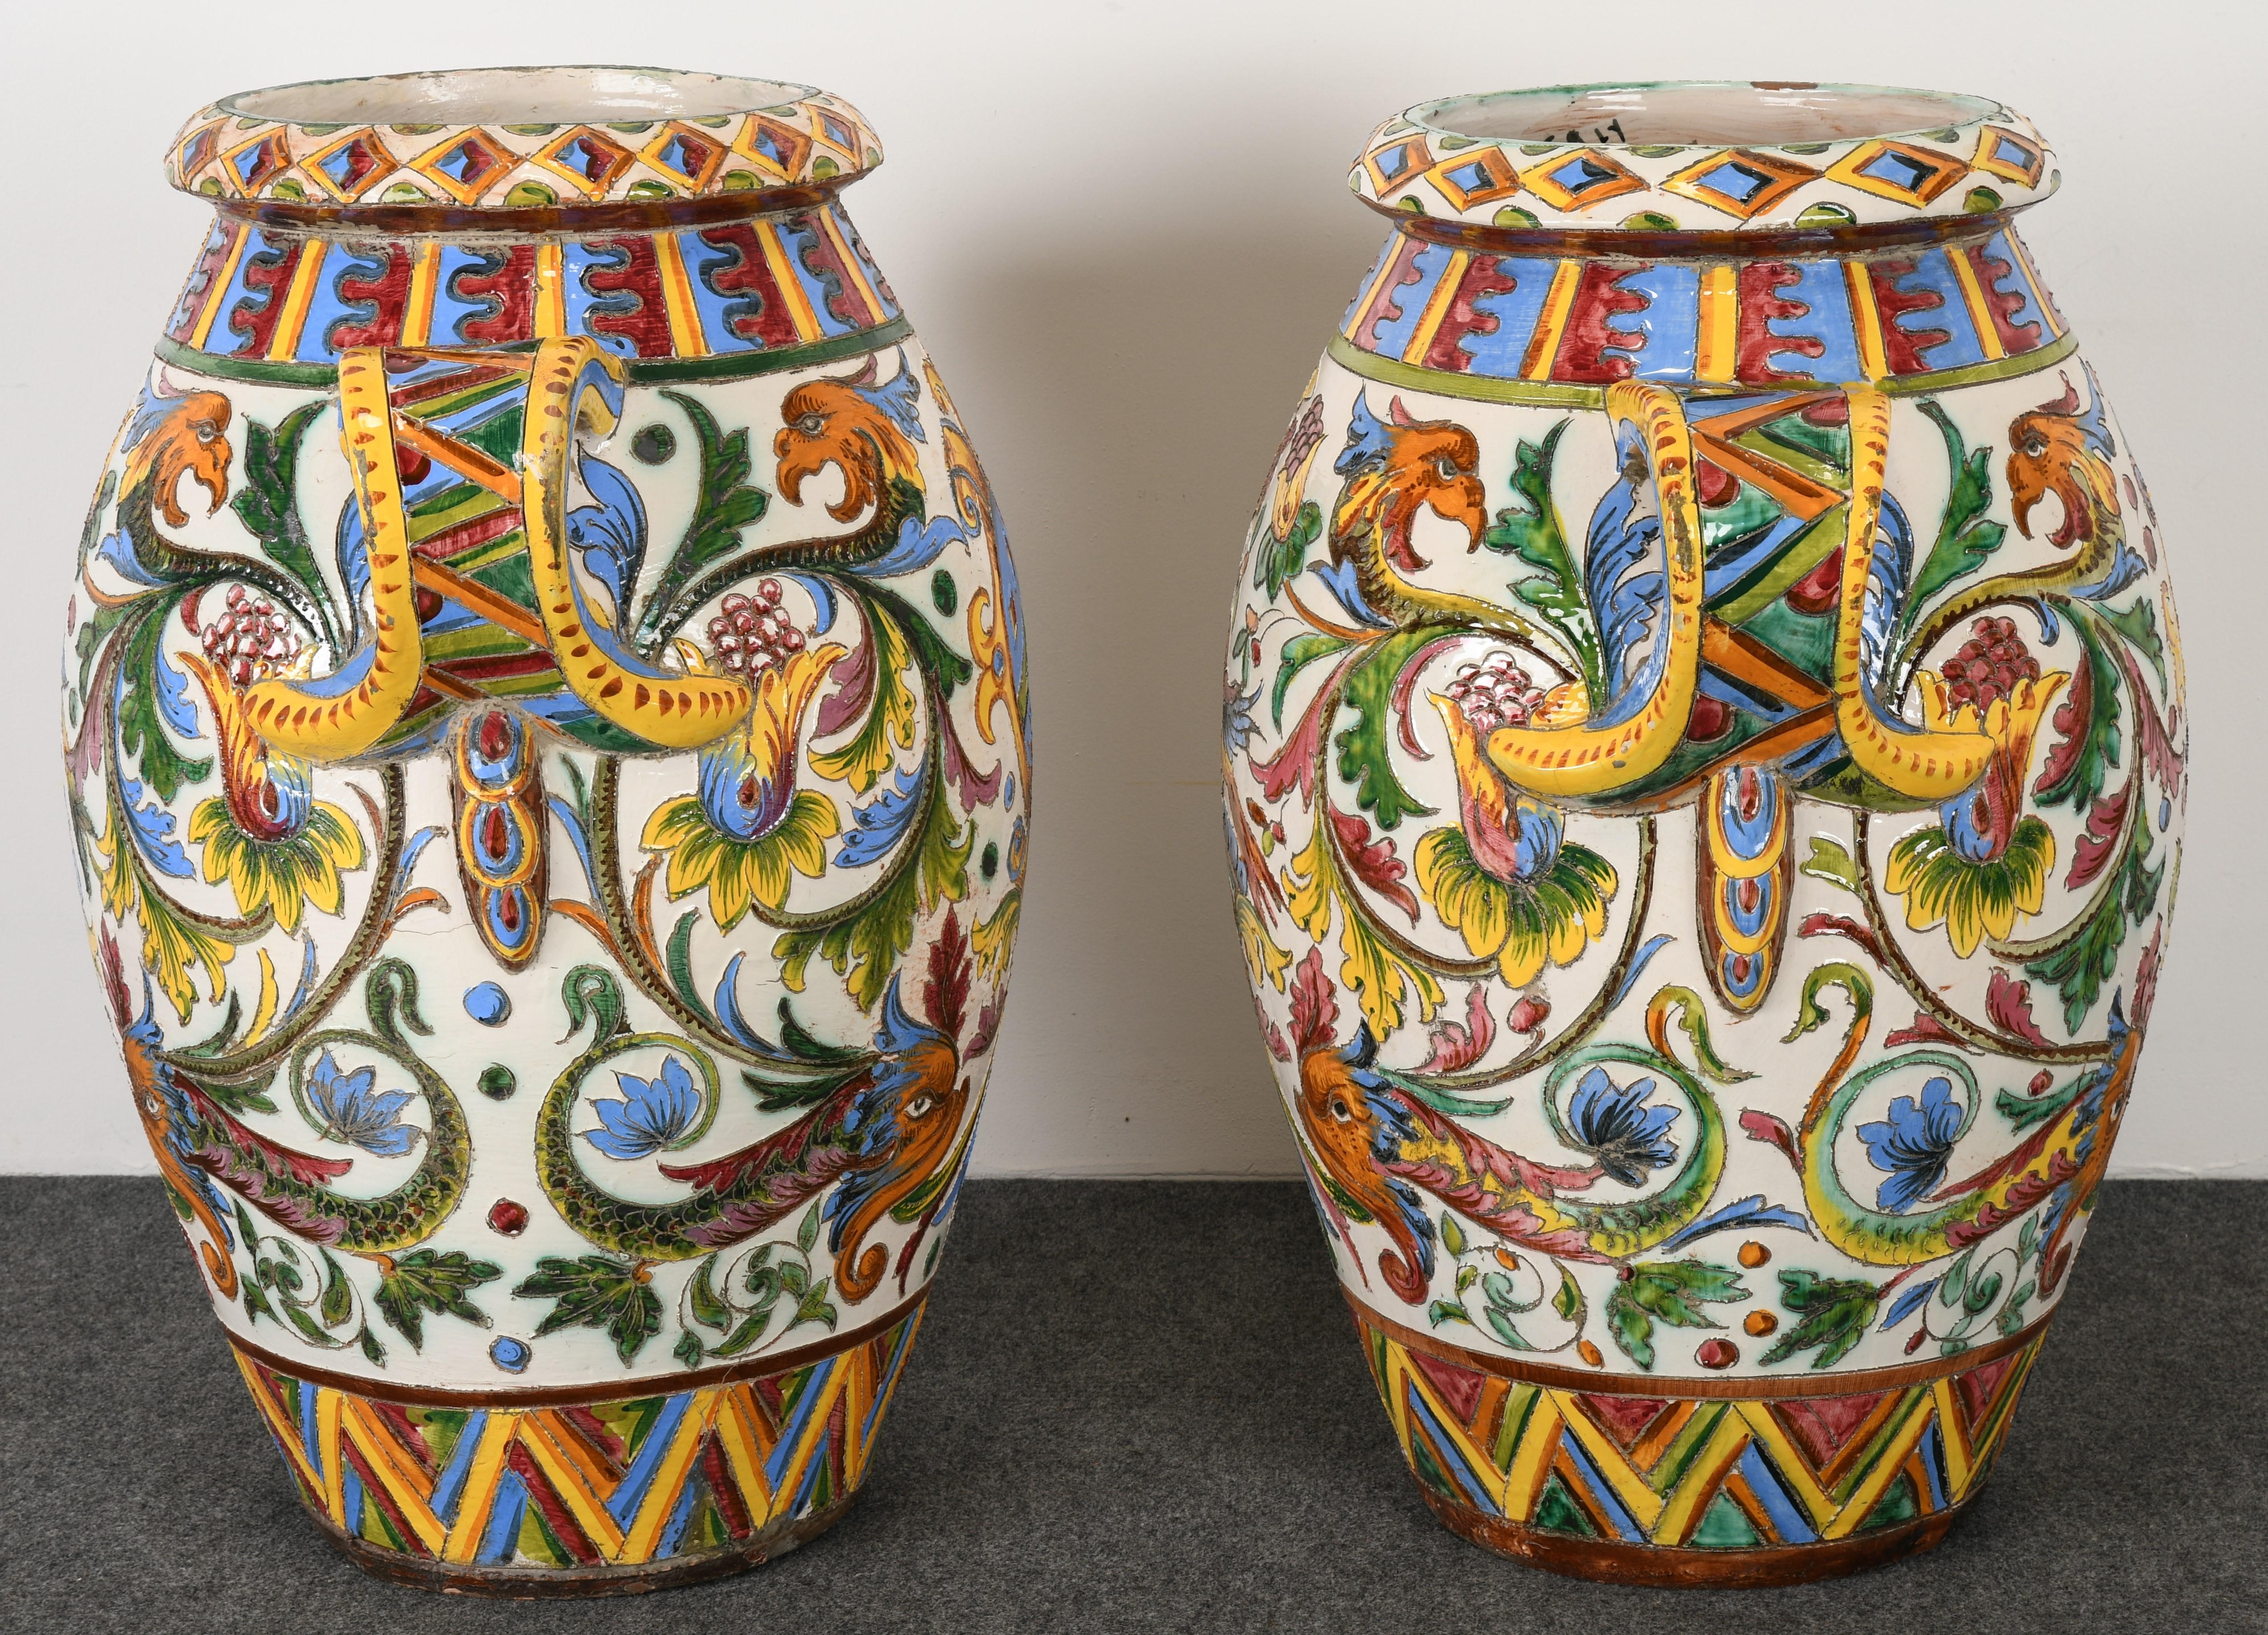 A stately pair of large-scale Italian Majolica Terracotta Urns. These one-of-a-kind Earthenware vases are extremely colorful and striking with hand-painted Sgraffito work of vibrant depictions of griffins, dolphins, and a coat of arms Painted 